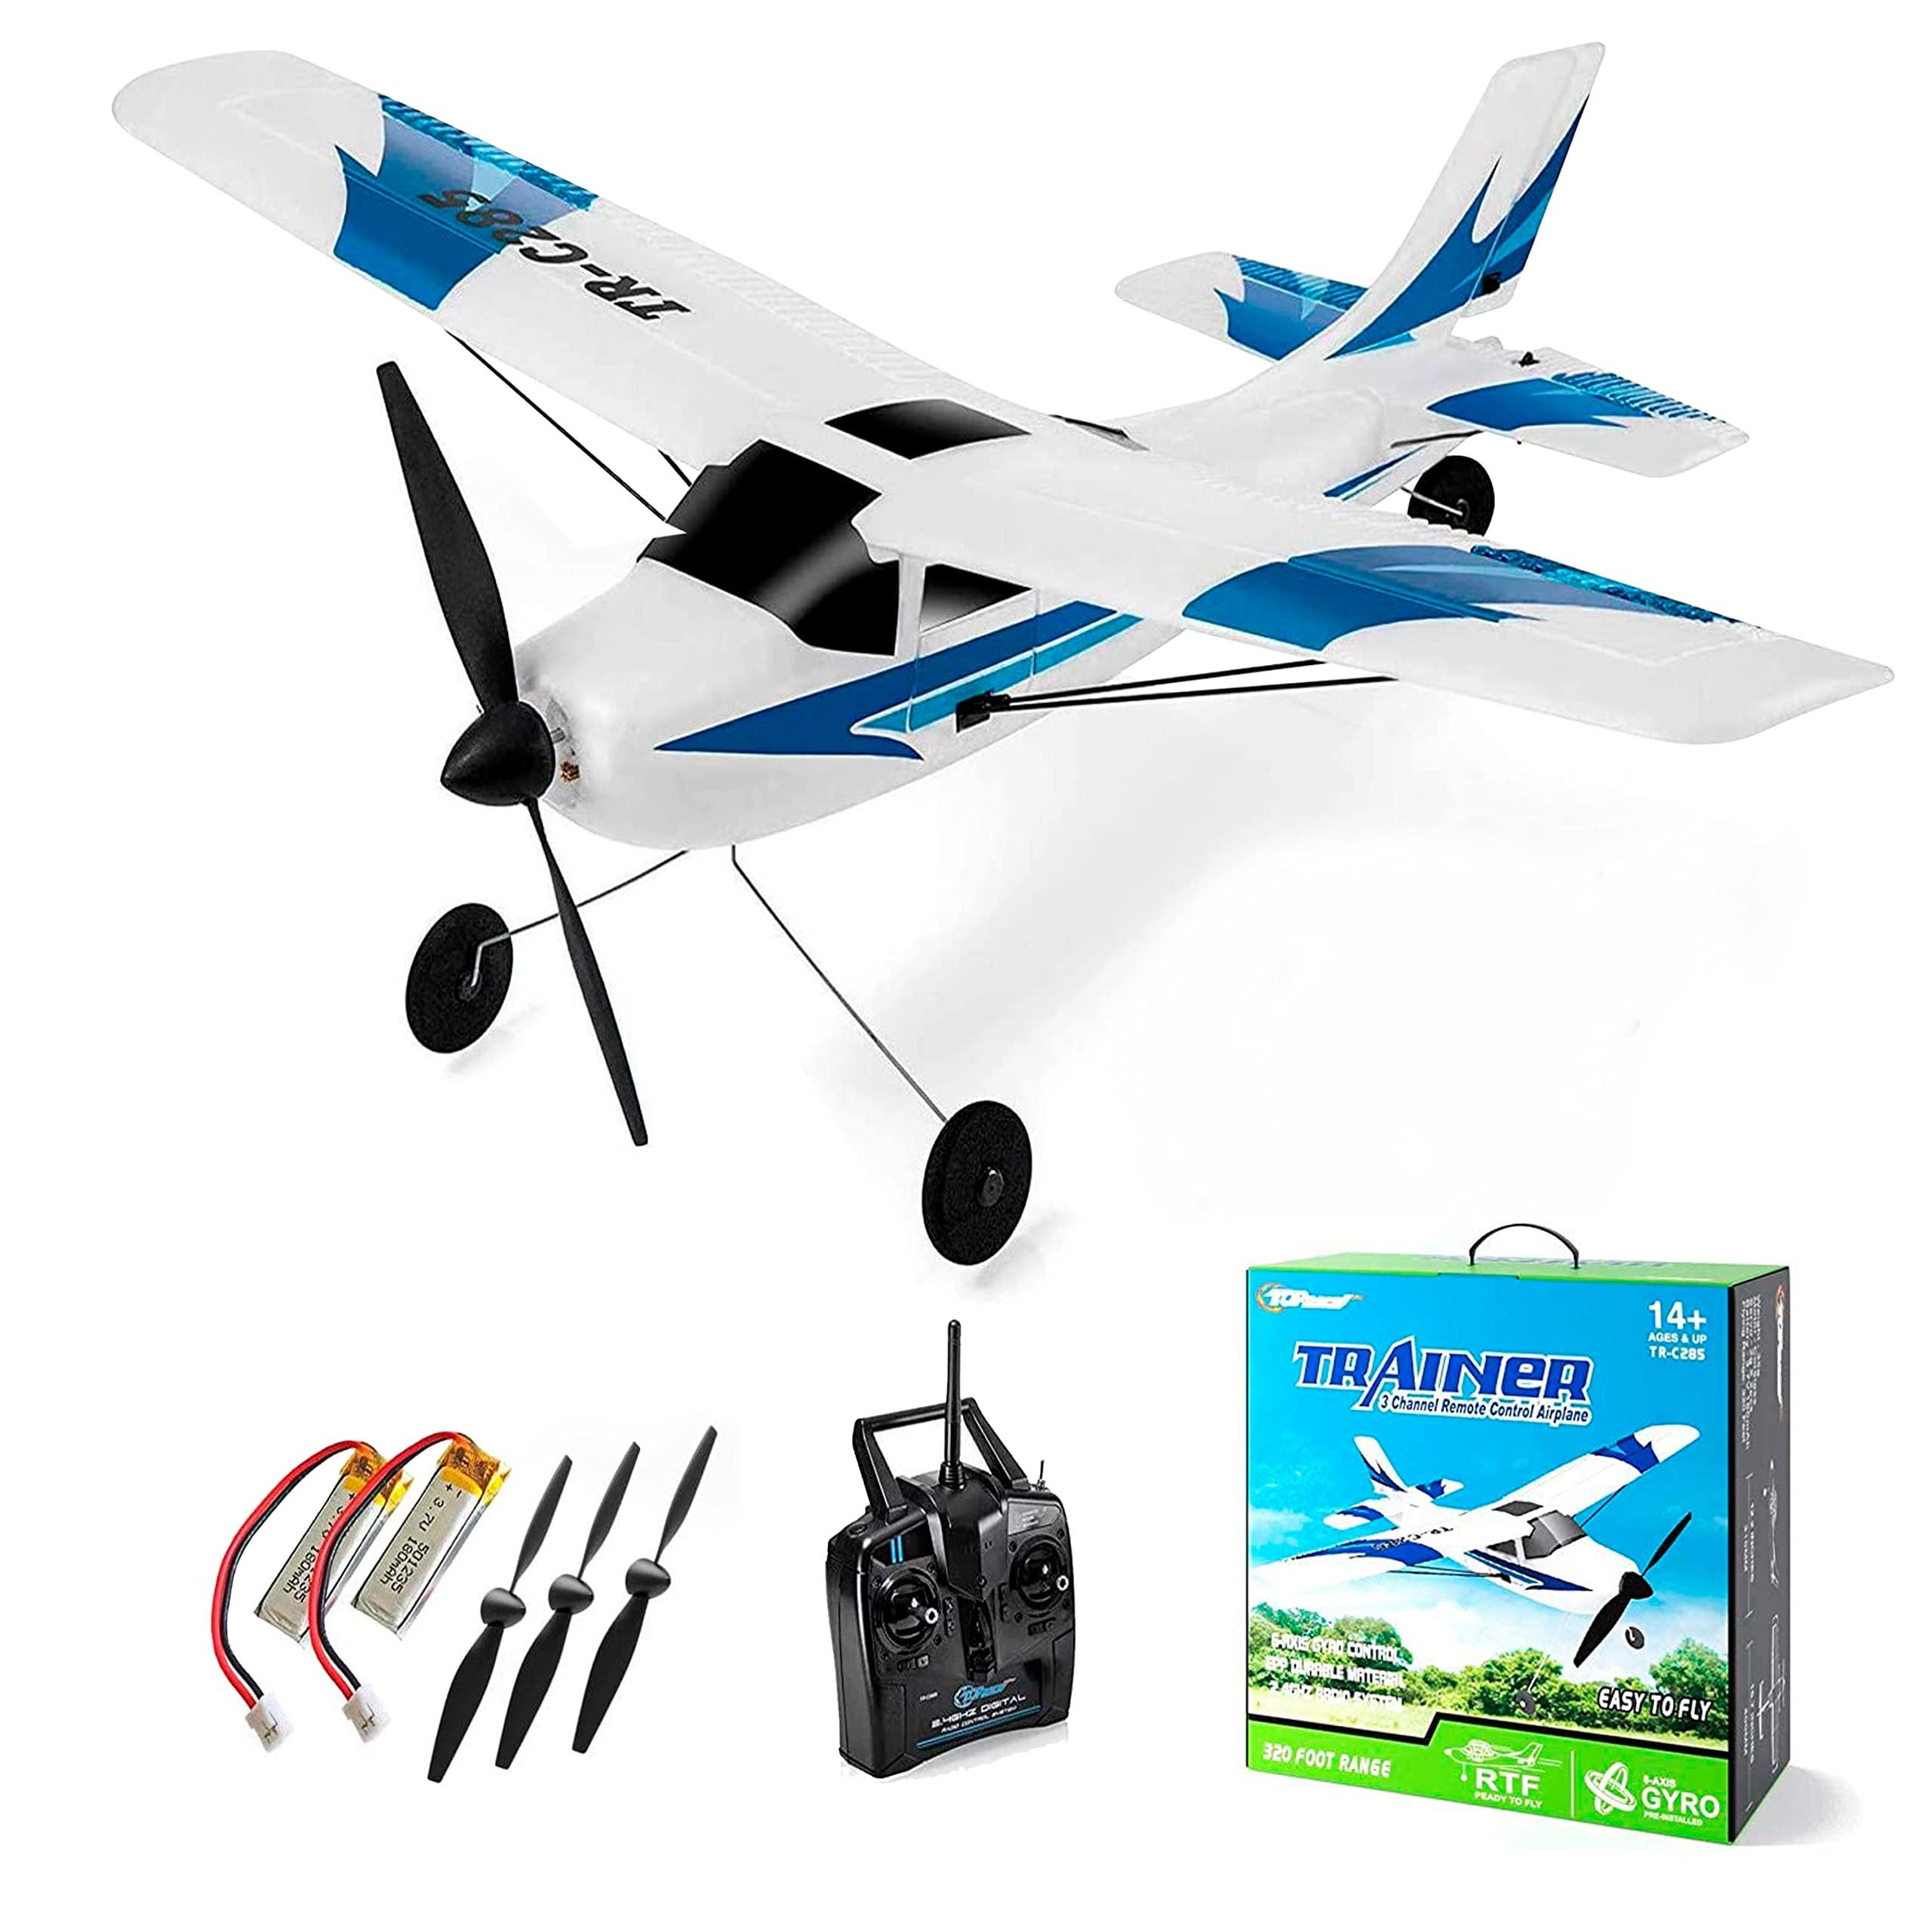 Fly Rc Planes Near Me: Choosing the Right Type of RC Plane for Beginners